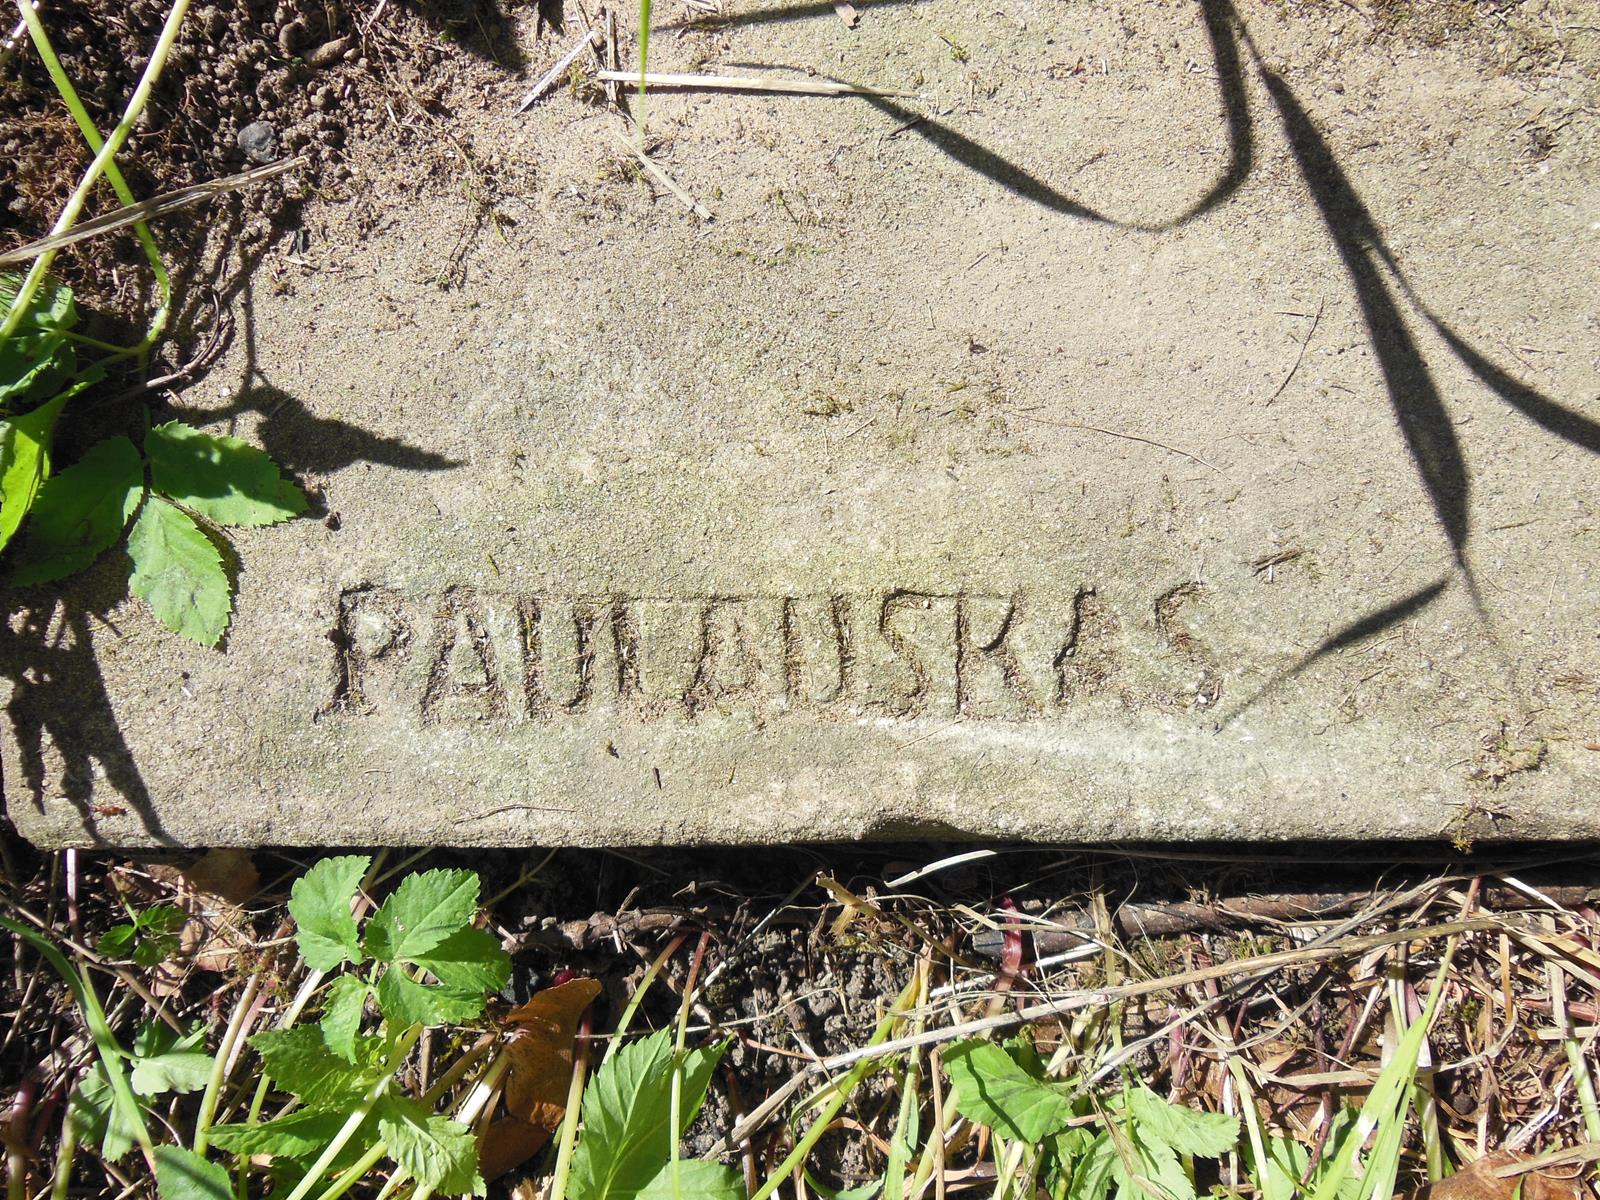 Signature of the artist on the tombstone of Antoni Kluk, Ross cemetery in Vilnius, as of 2013.